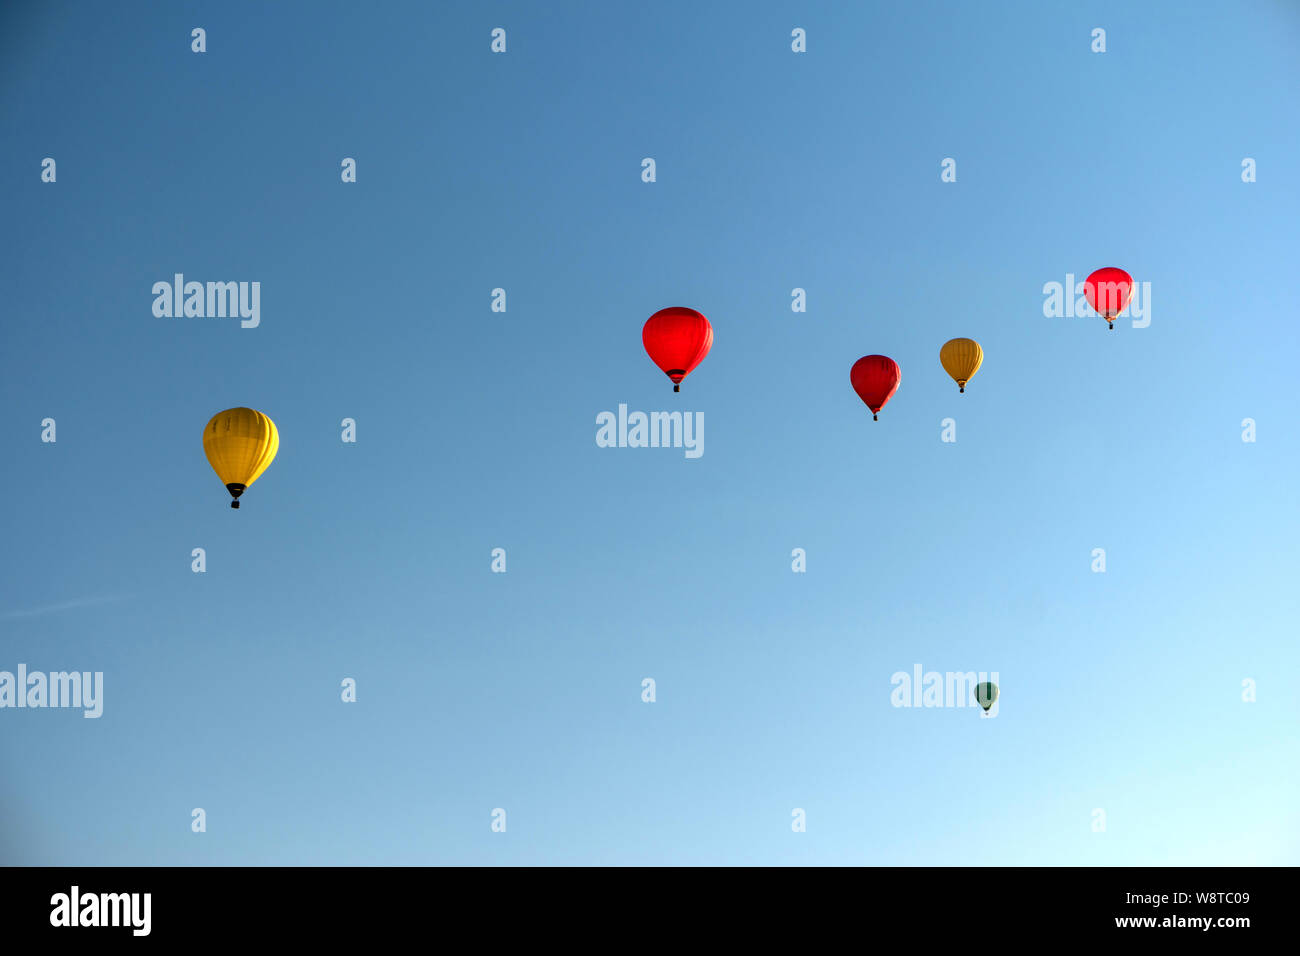 Several hot air balloons in the sky Stock Photo